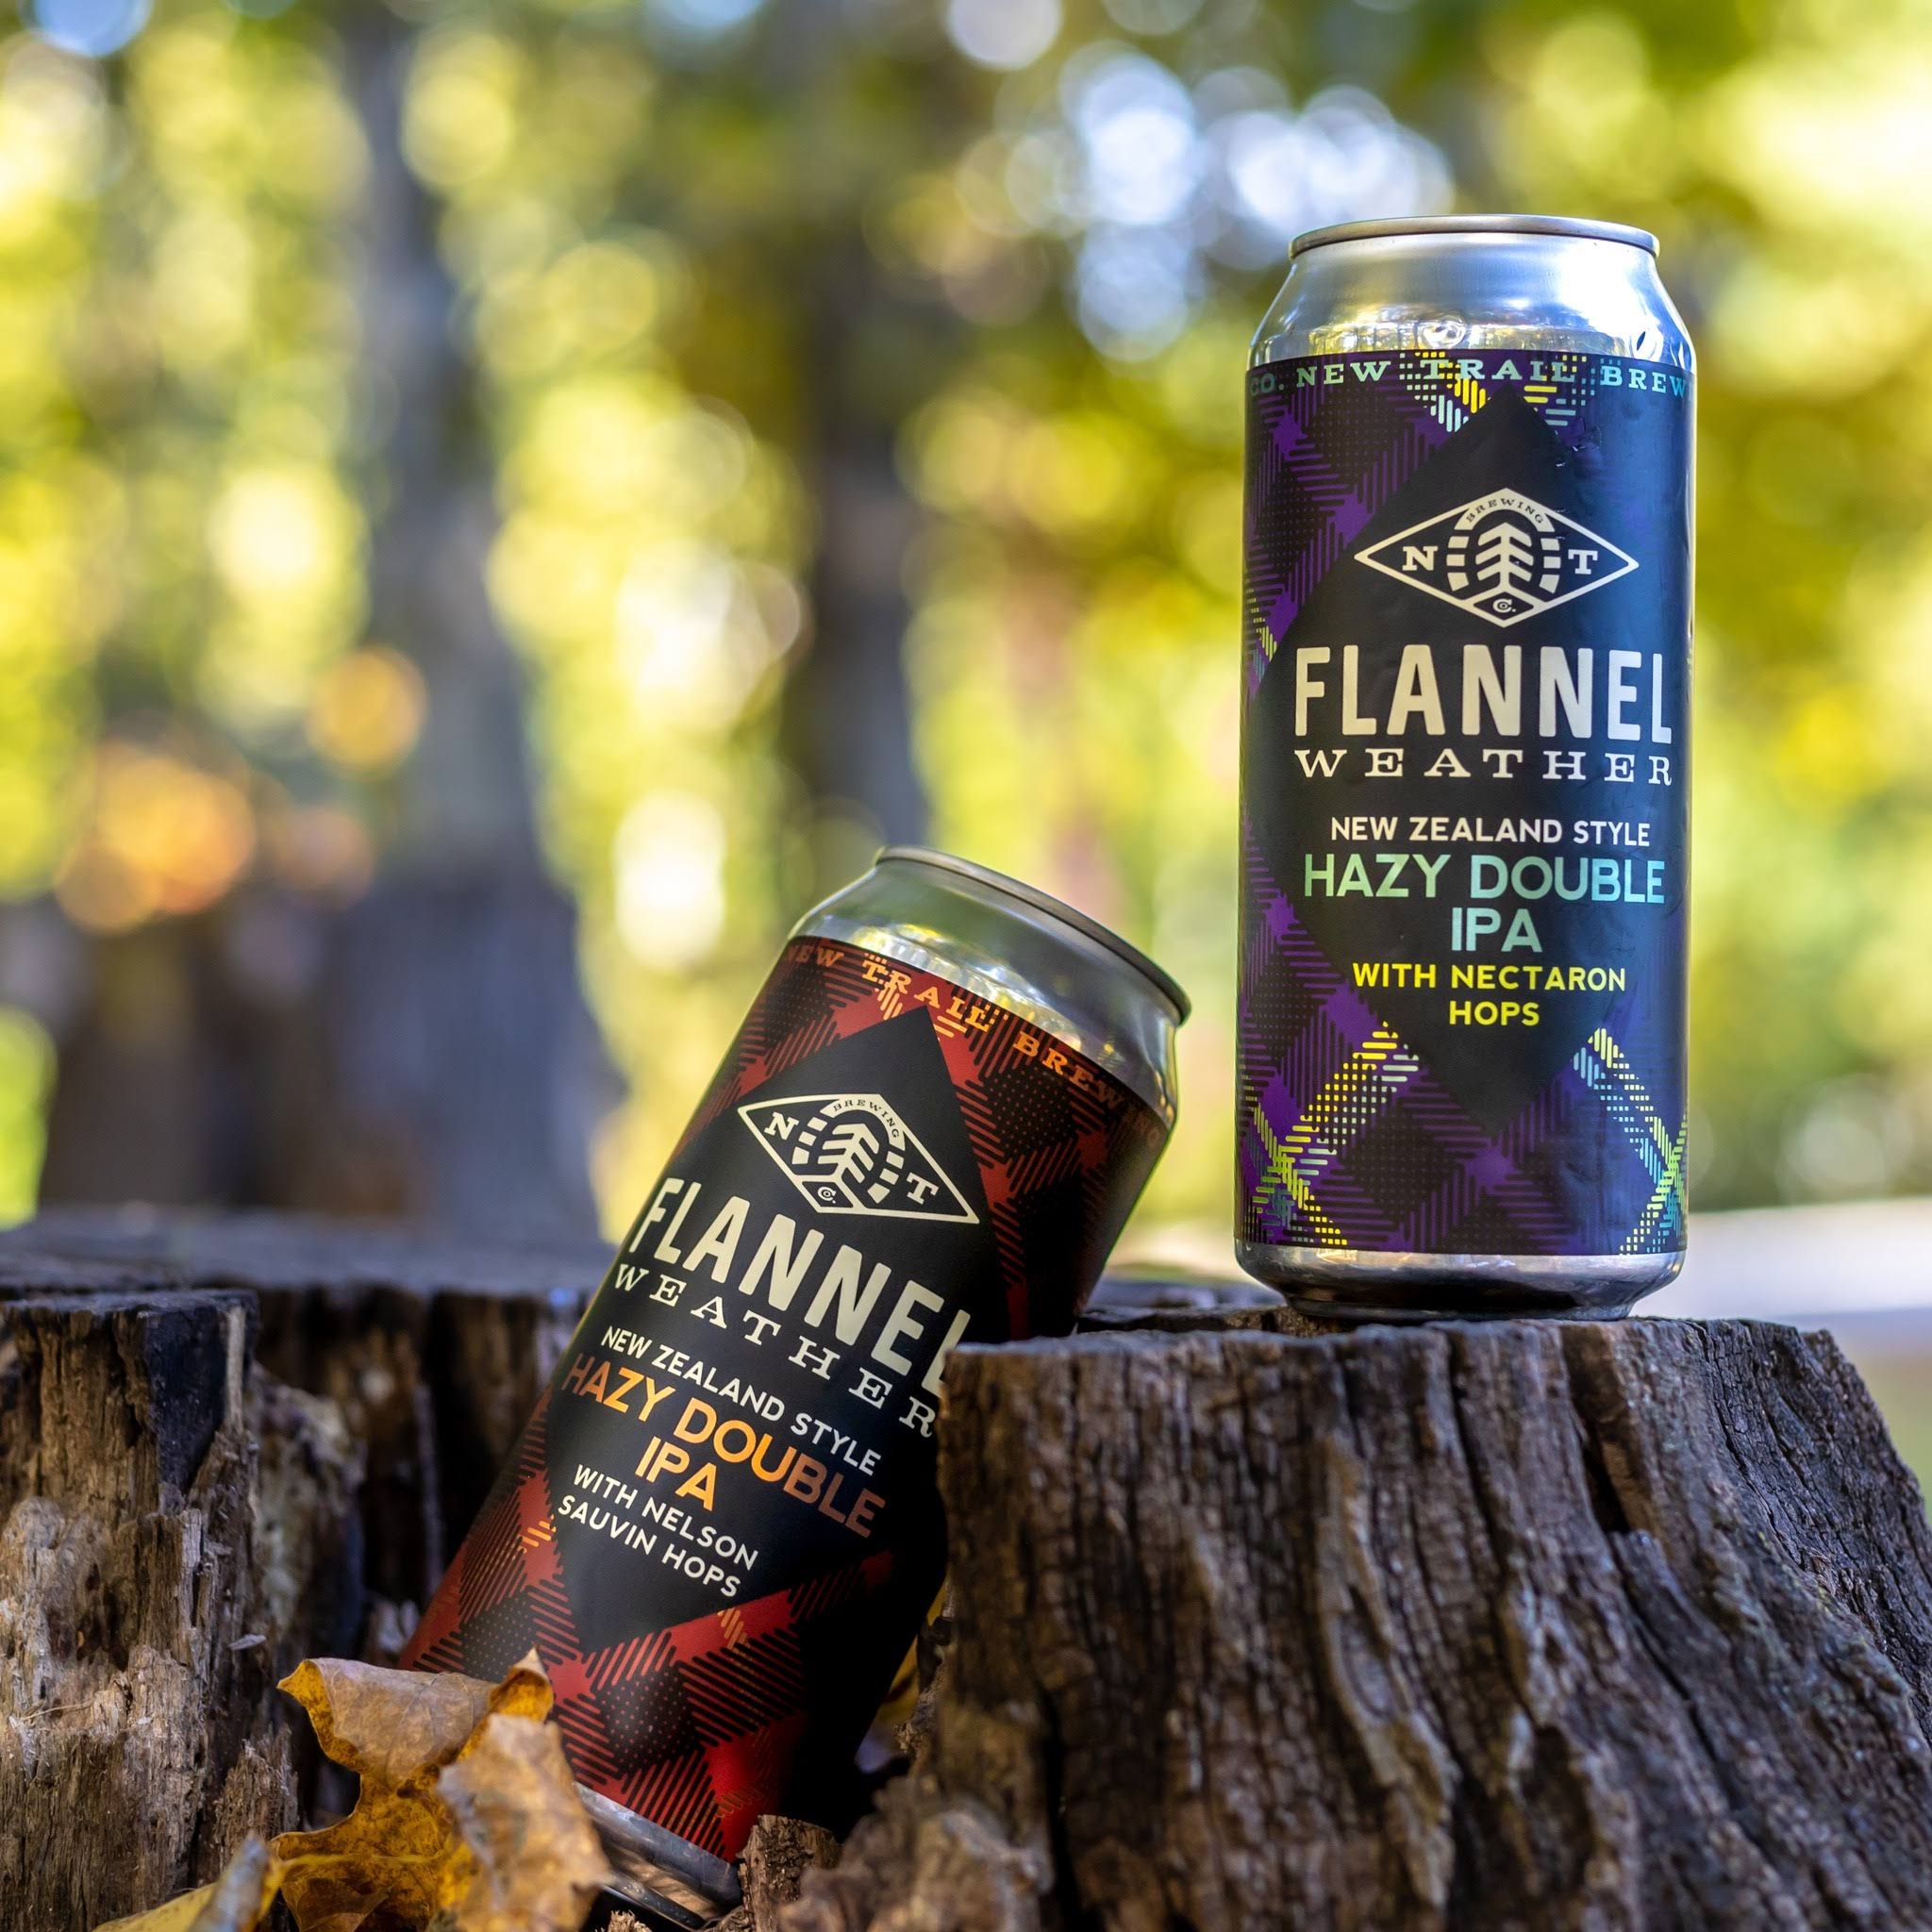 New Trail Flannel Weather: Nectaron Hops (4 Pack - 16oz cans)